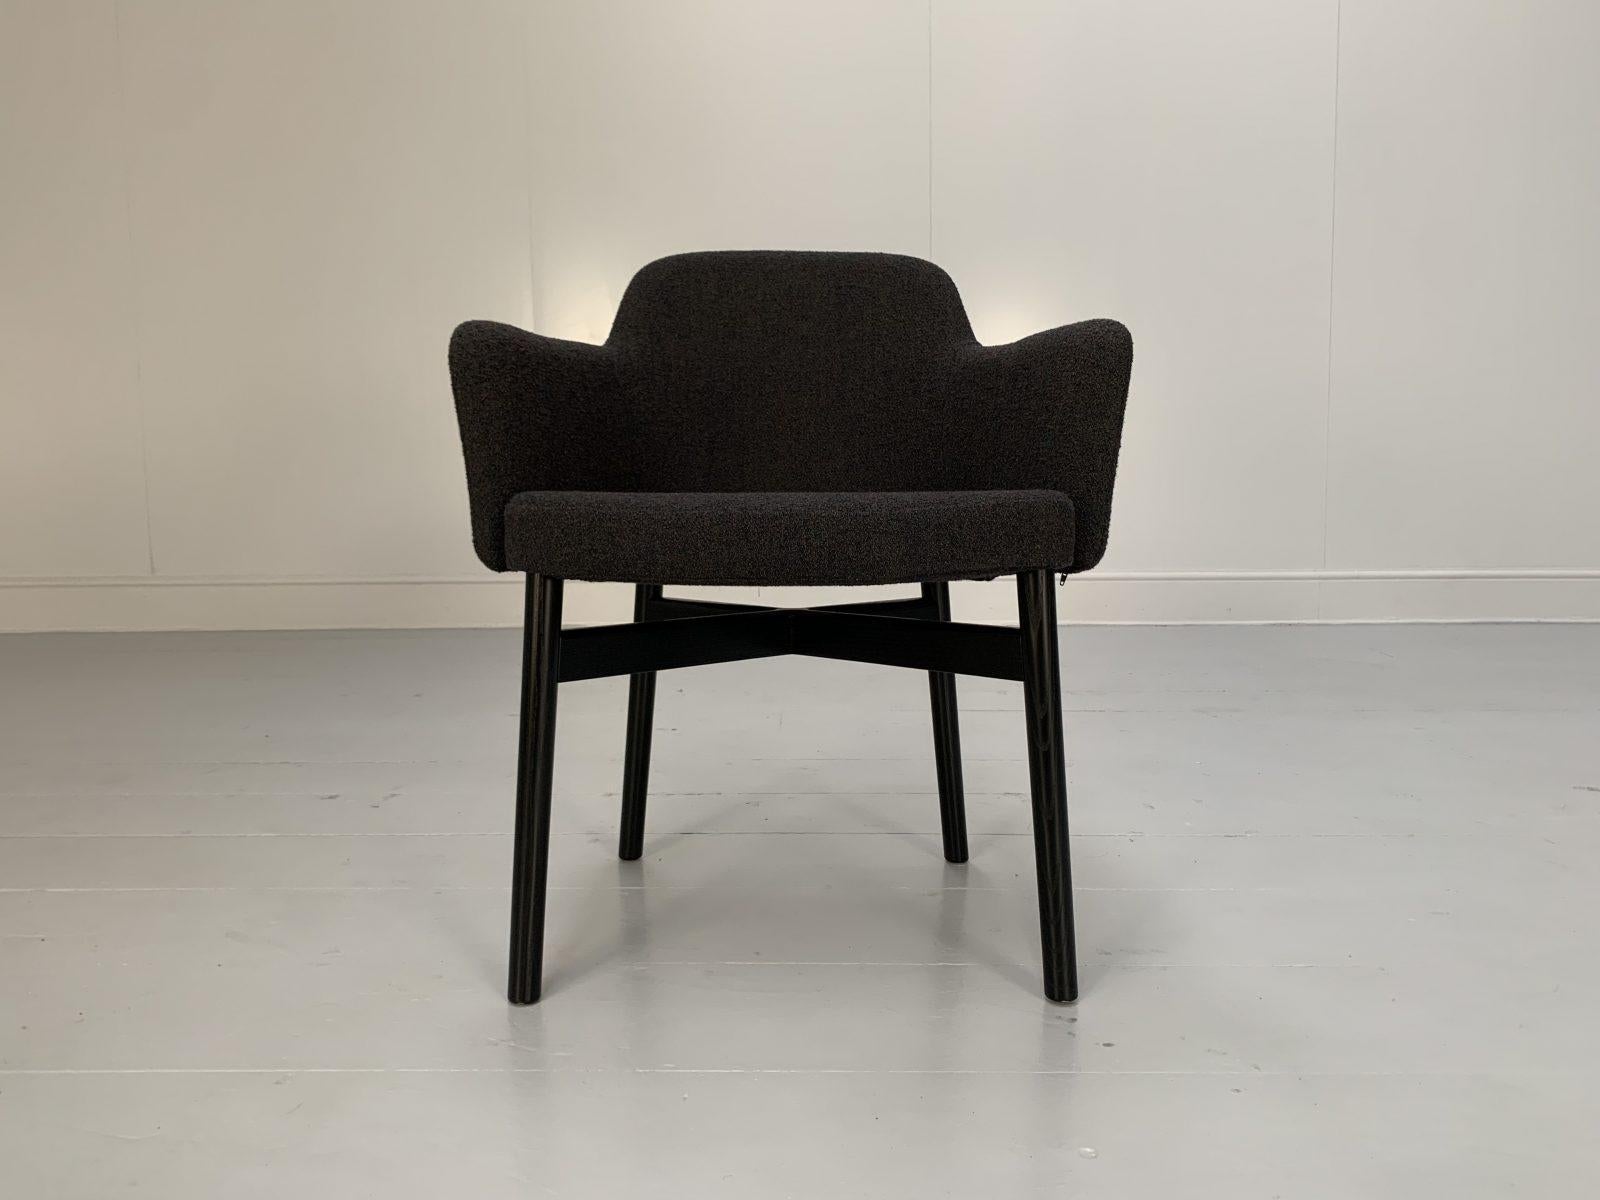 Contemporary Suite of 6 Knoll Studio “Krusin 016” Armchairs – In Dark Boucle Wool For Sale